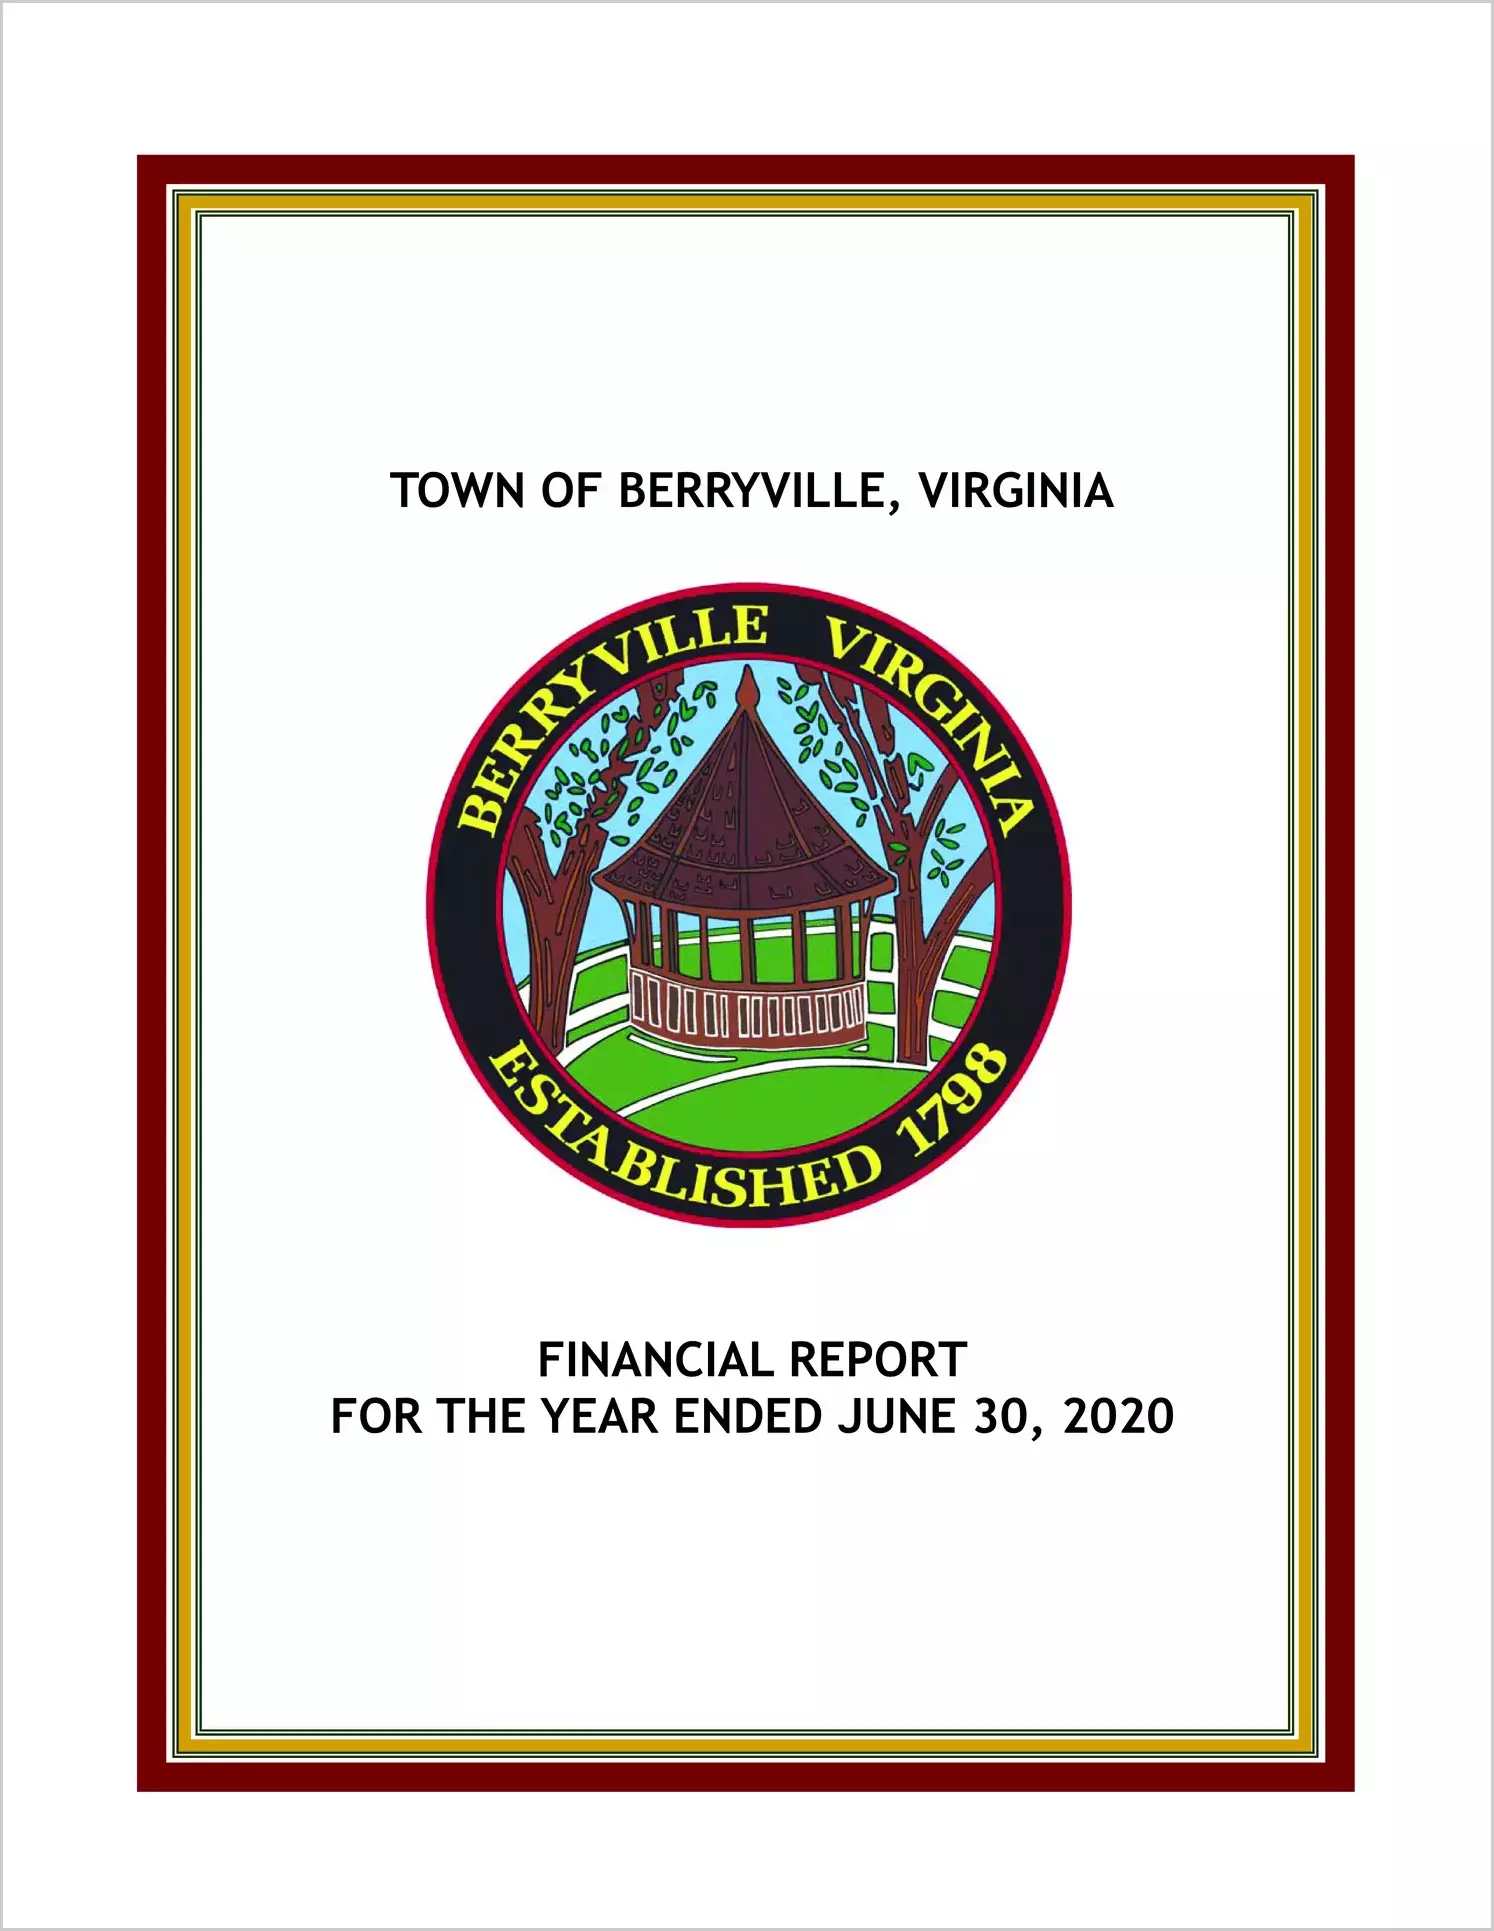 2020 Annual Financial Report for Town of Berryville